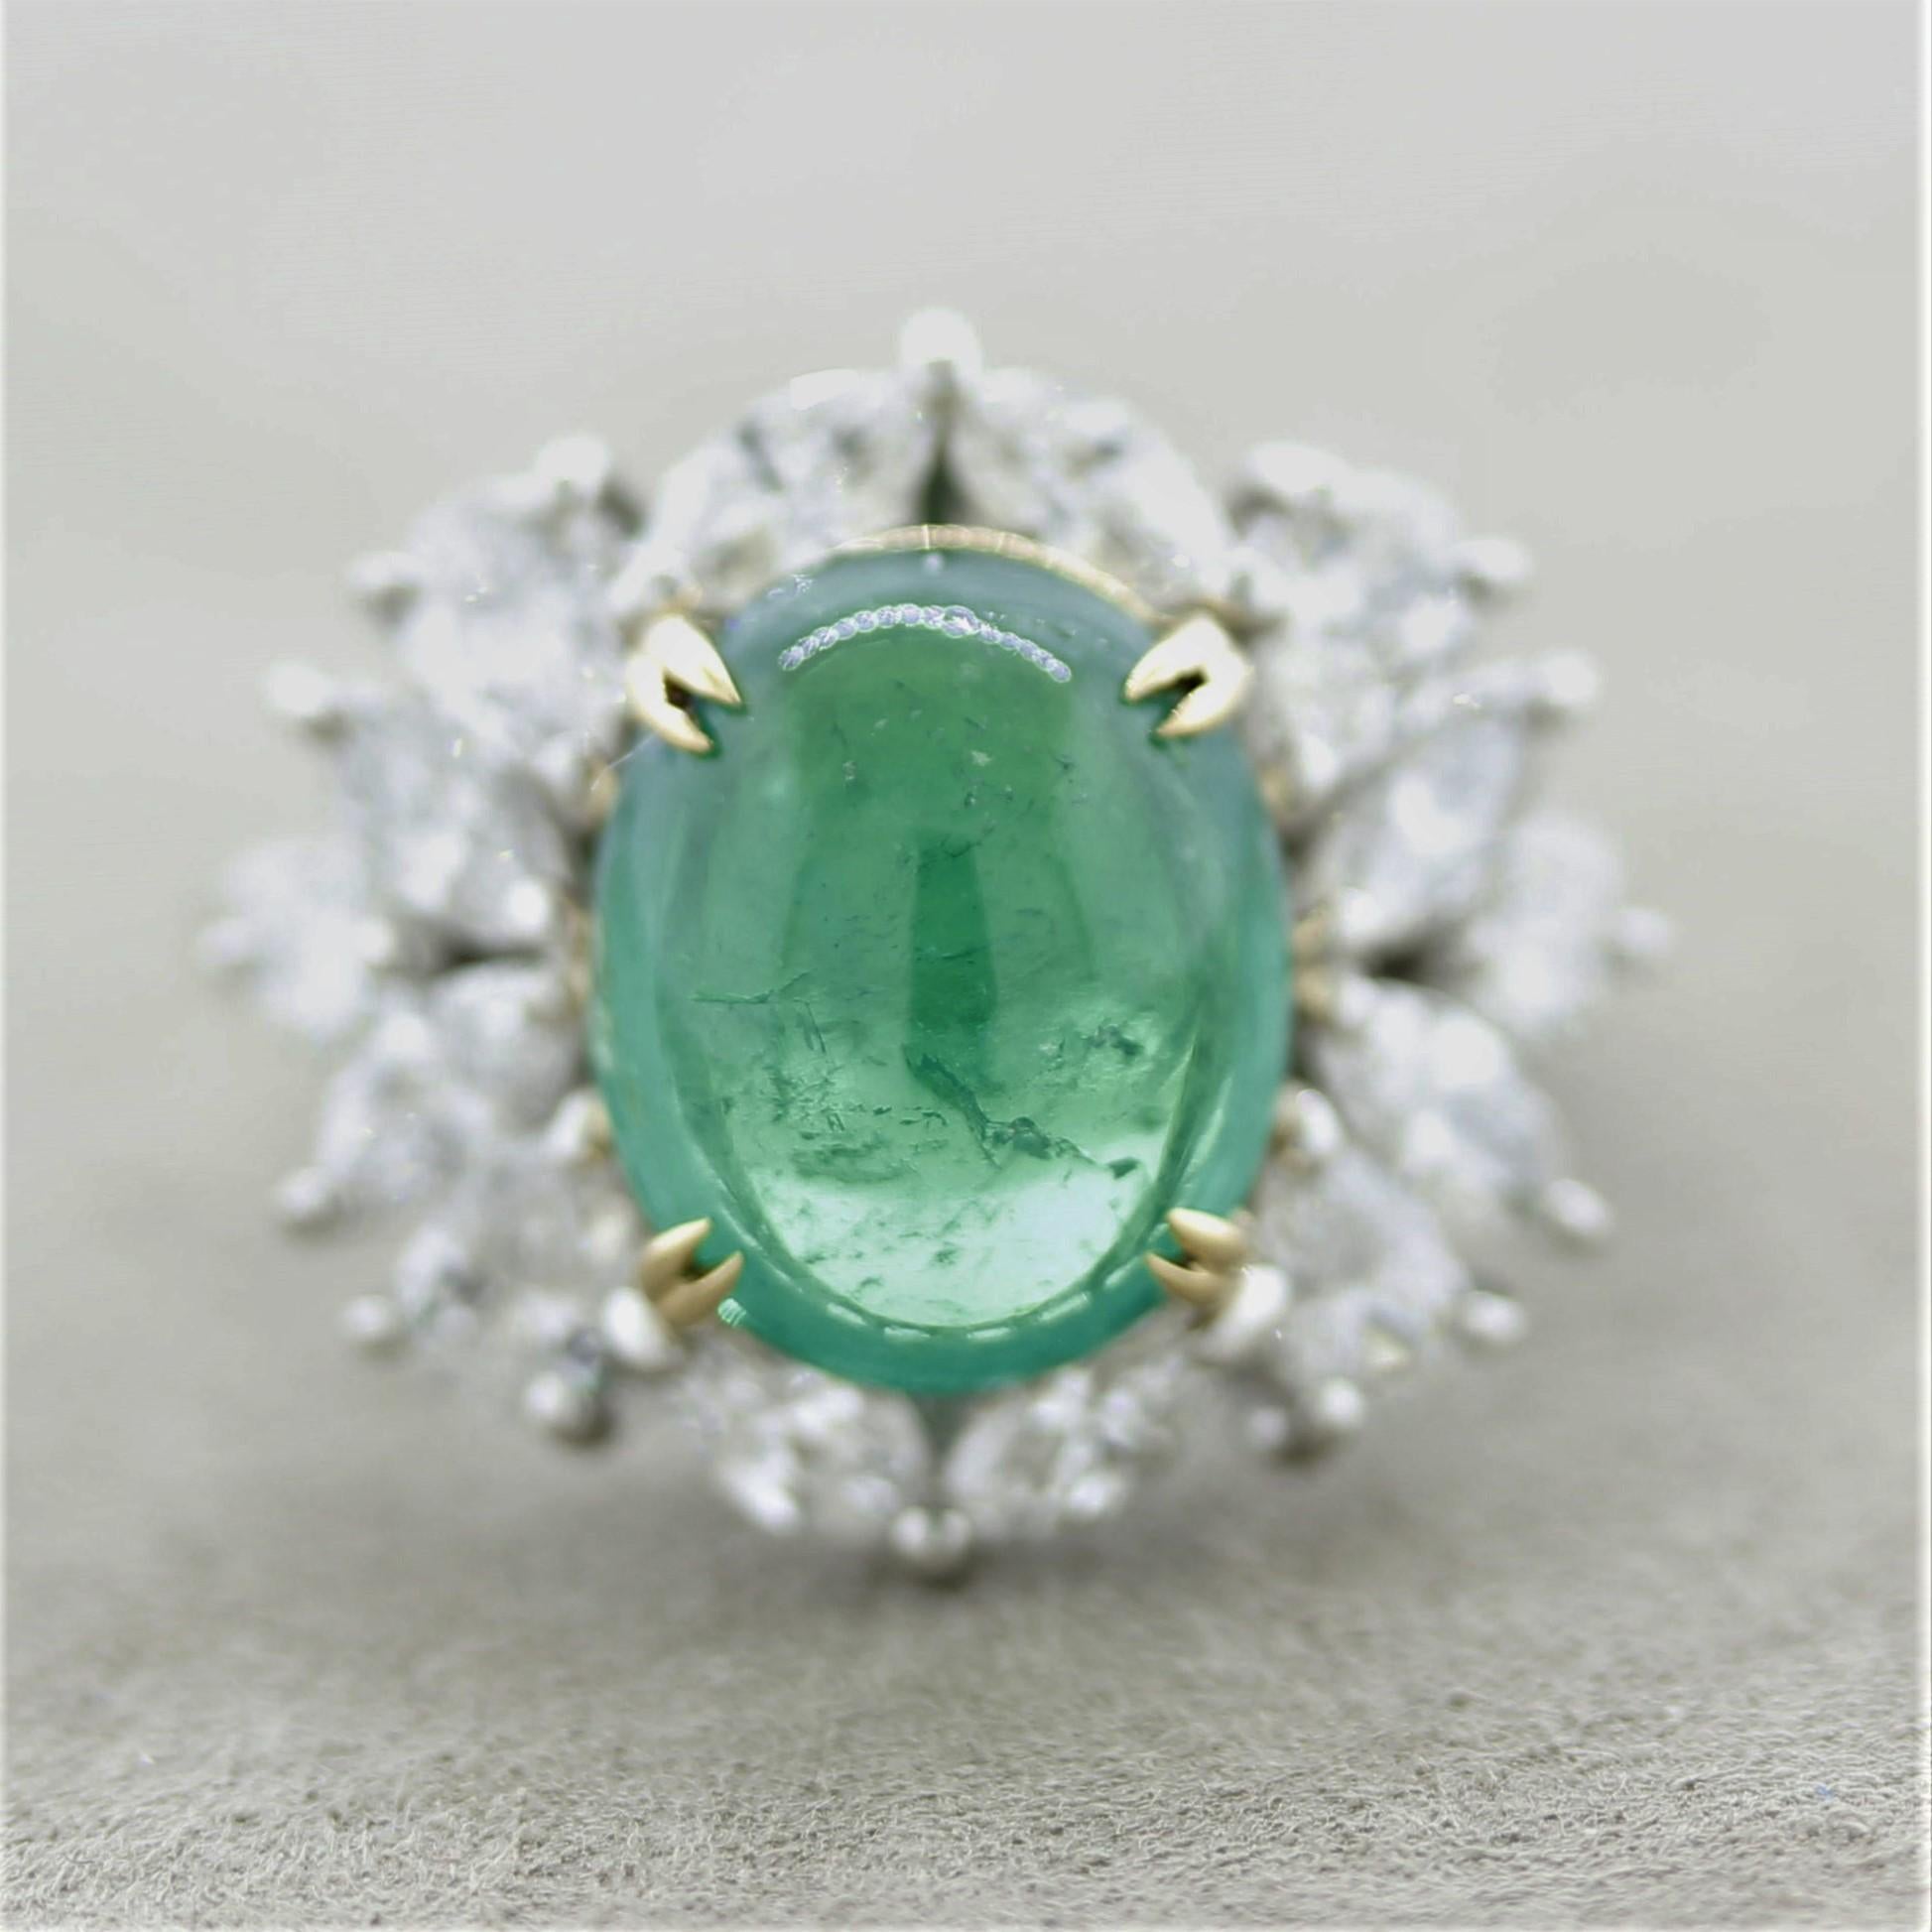 A superb gem emerald takes center stage of this platinum made ring. It weighs 4.87 carats and has a gemmy vivid grass green color that rivals the finest of emeralds on the market. It is complemented by 2.15 carats of round brilliant, marquise, and